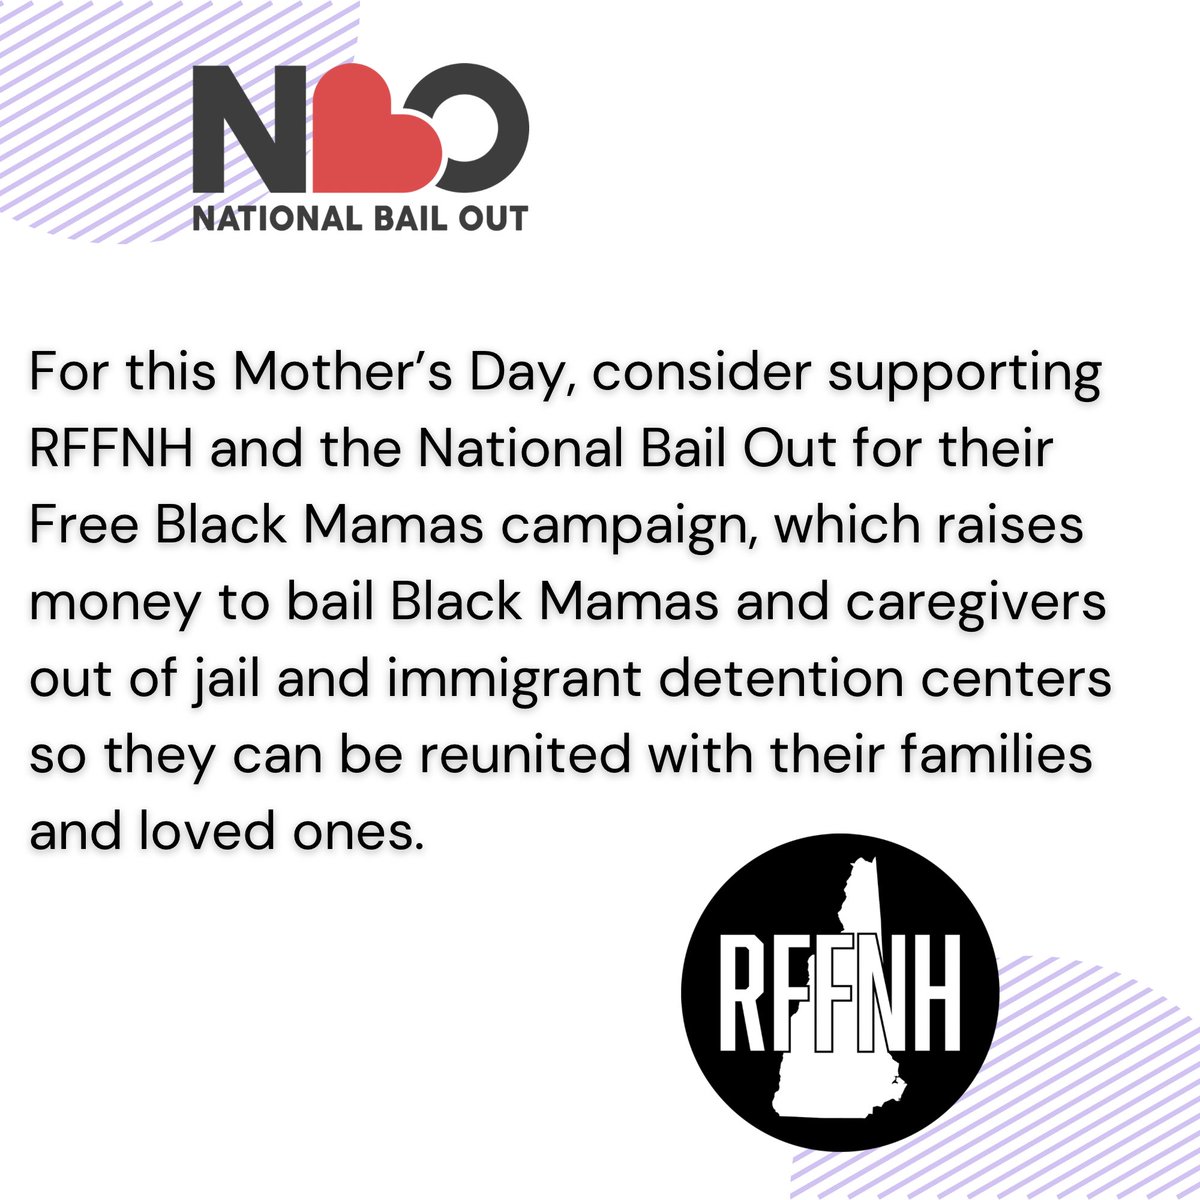 For this Mother’s Day, consider supporting RFFNH and the National Bail Out for their Free Black Mamas campaign, which raises money to bail Black Mamas and caregivers out of jail and immigrant detention centers so they can be reunited with their families and loved ones.